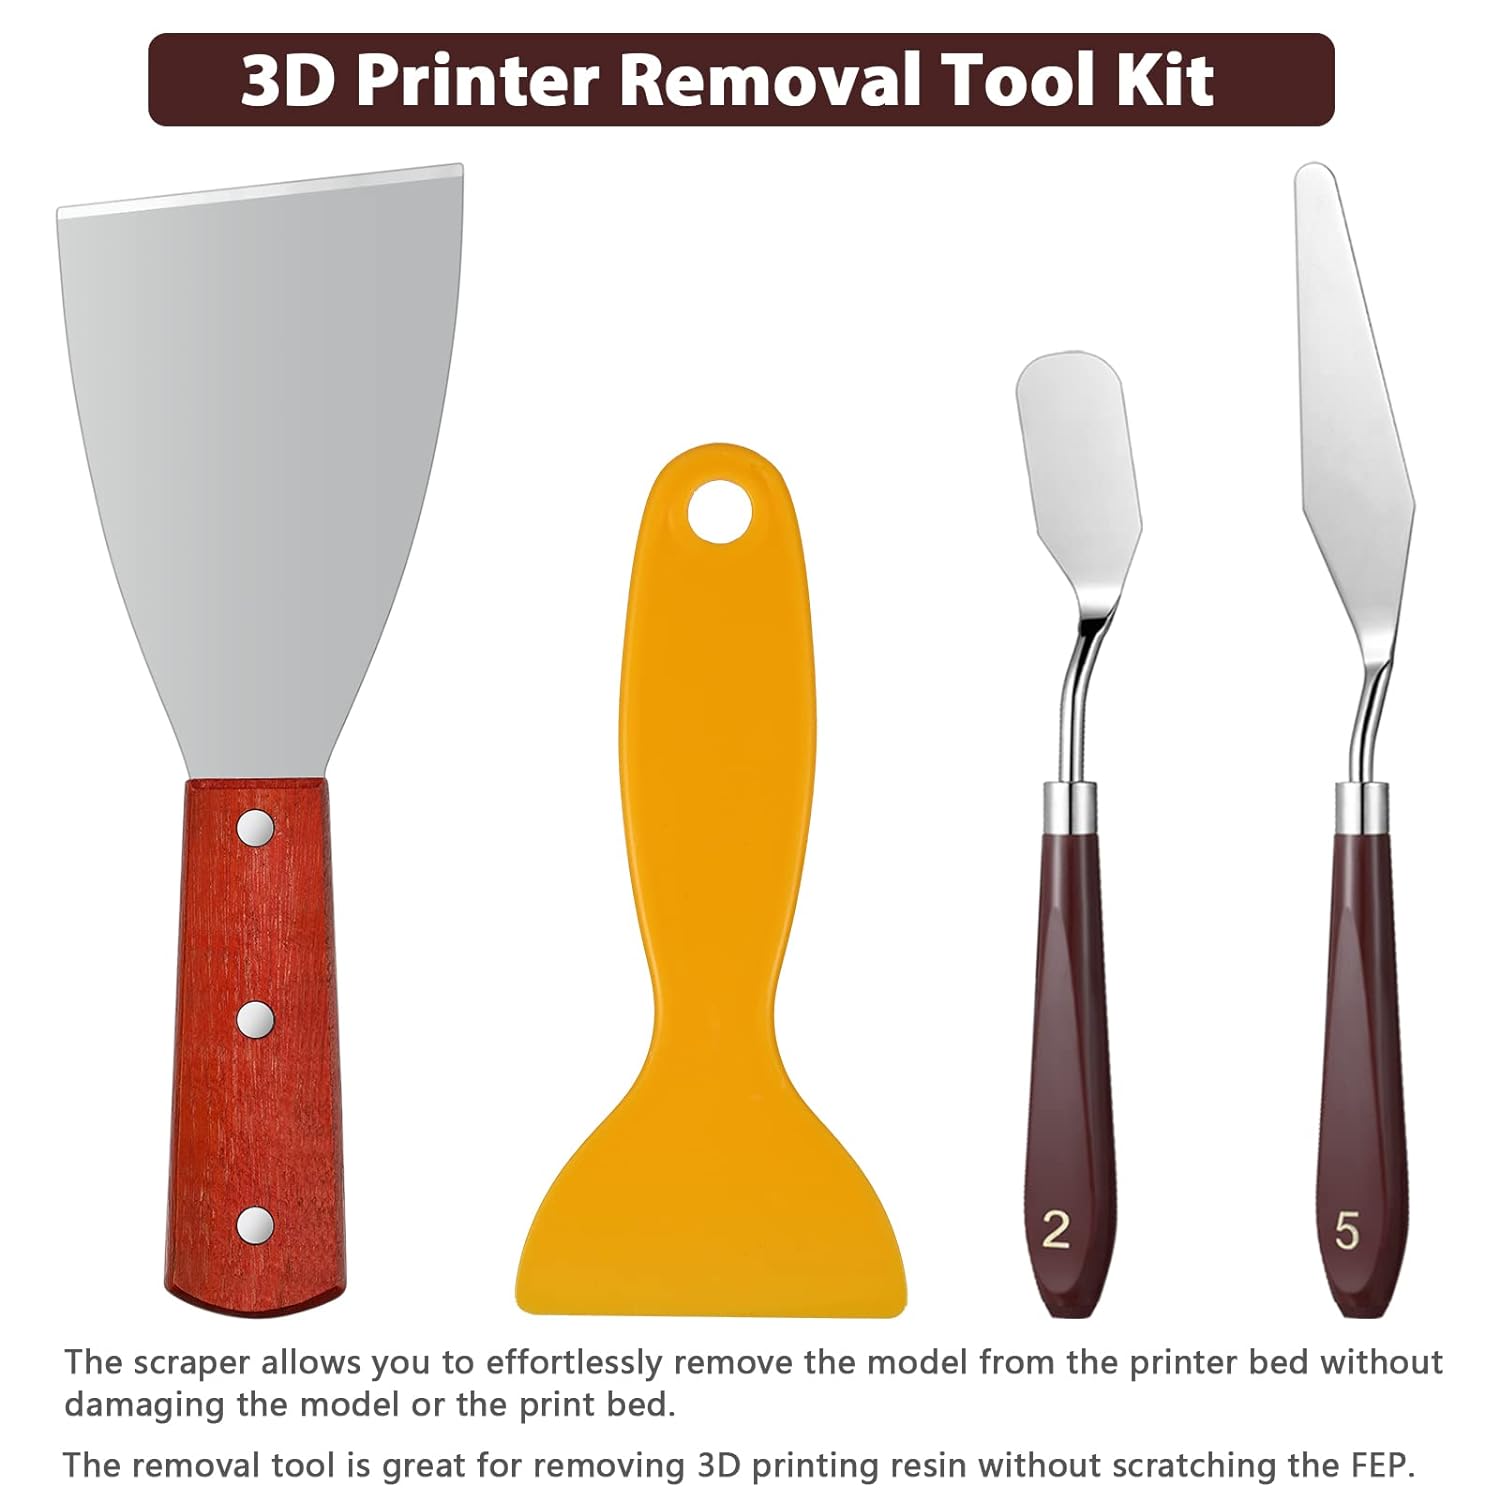 25-pcs-3d-printer-tools-kit-3d-printing-accessories-include-2-wire-brush-1-putty-knife-1-plastic-shovel-5-diamond-files-1-3 25 Pcs 3D Printer Tools Kit Review